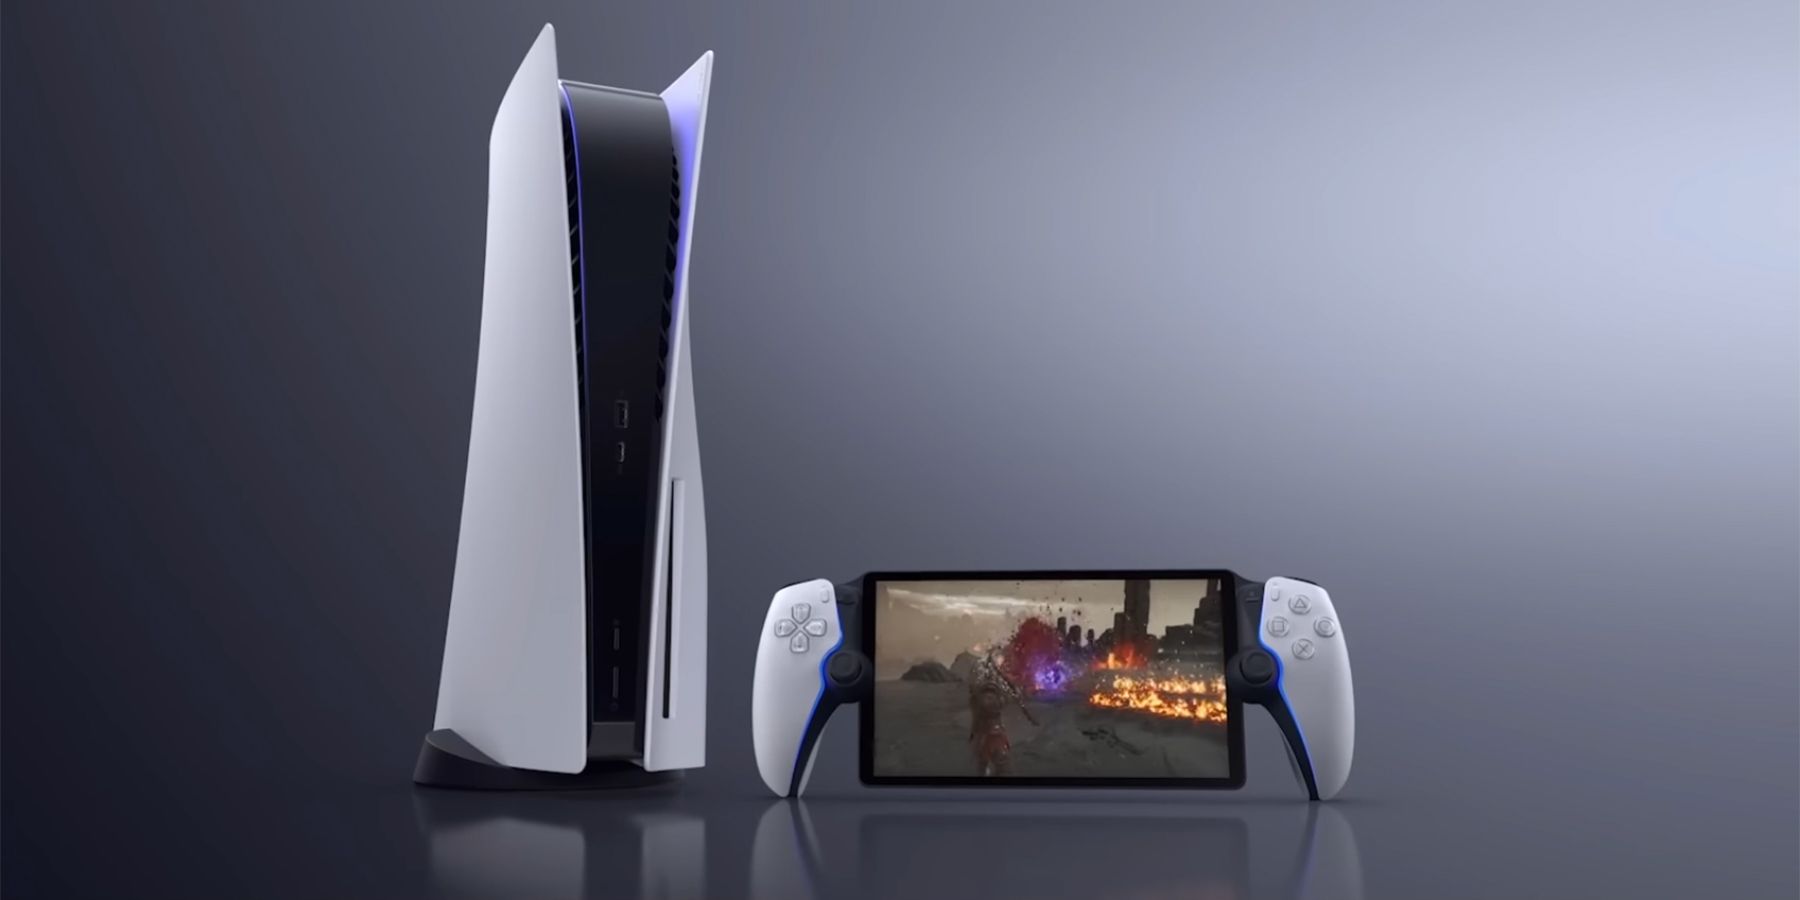 Playstation 5 with Project Q portable device